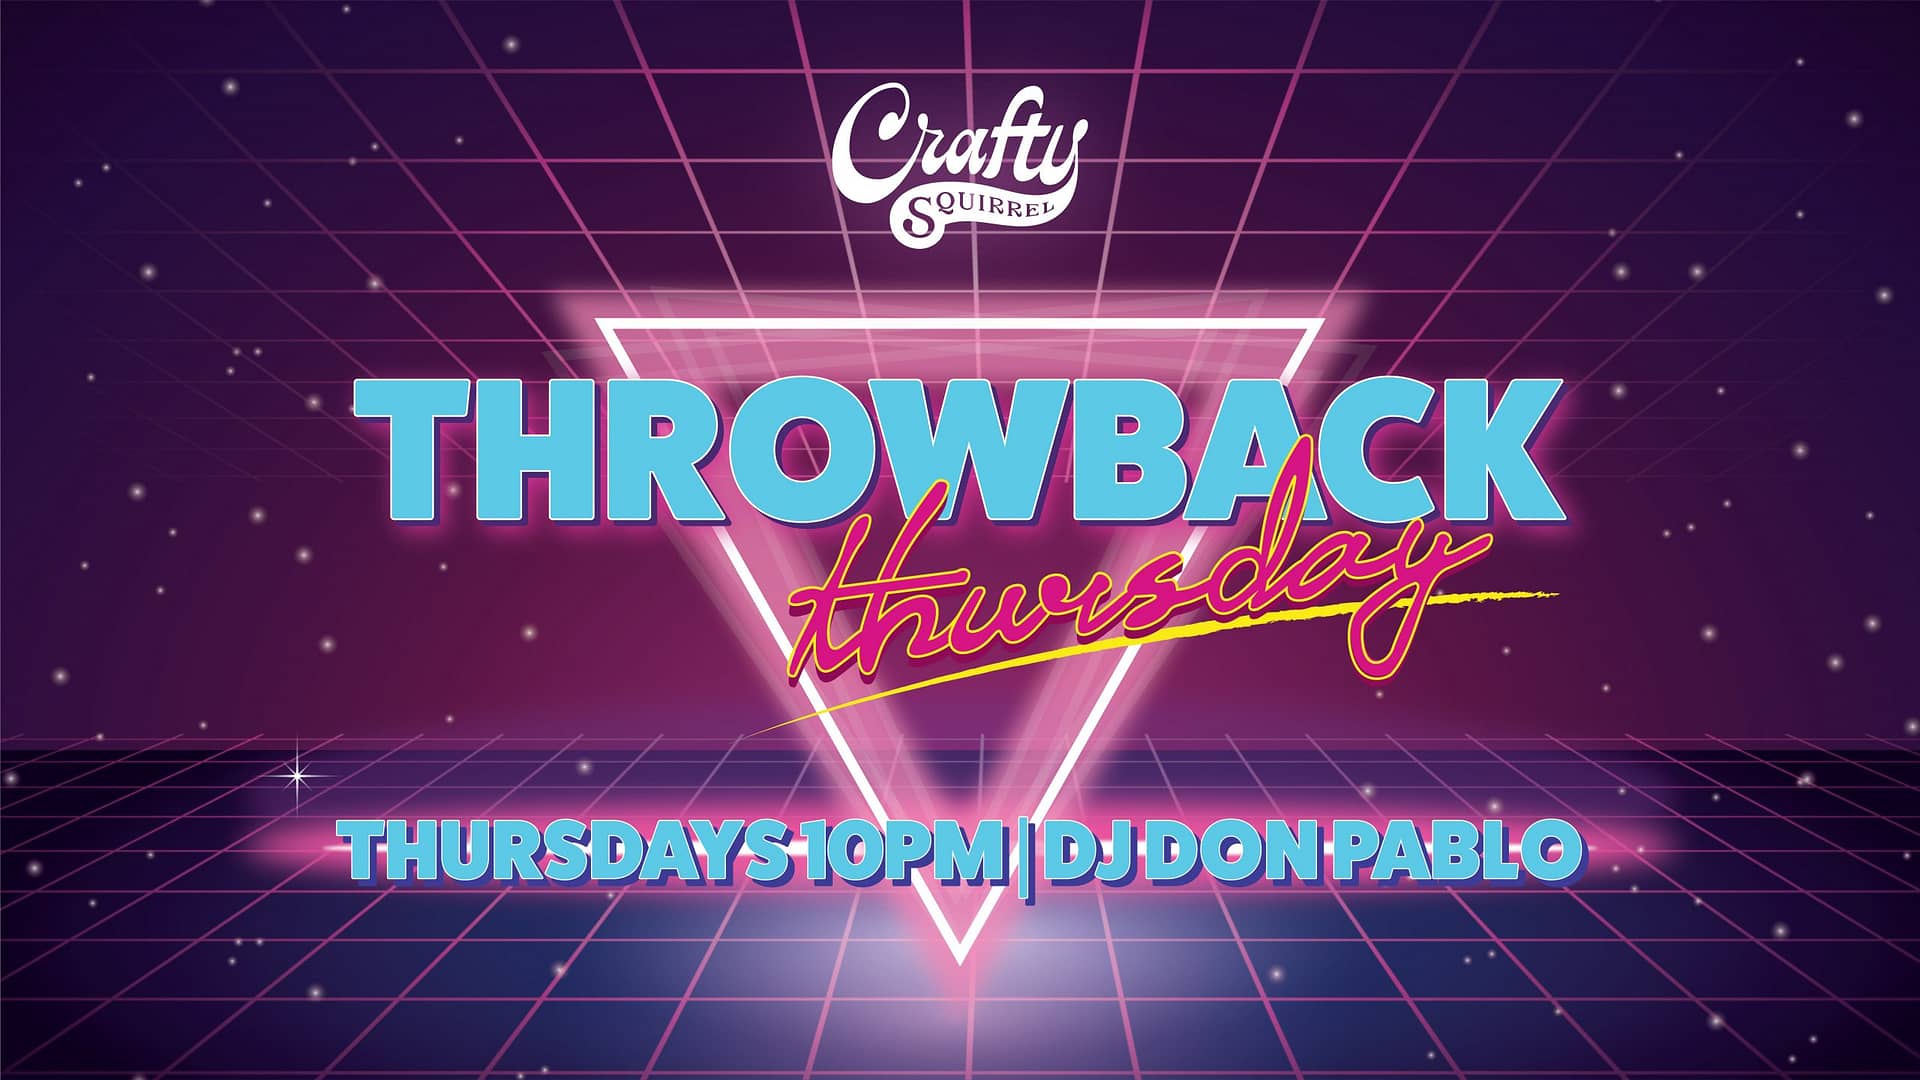 Throwback Thursdays at 10pm at Crafty Squirrel in downtown St. Petersburg, Florida.